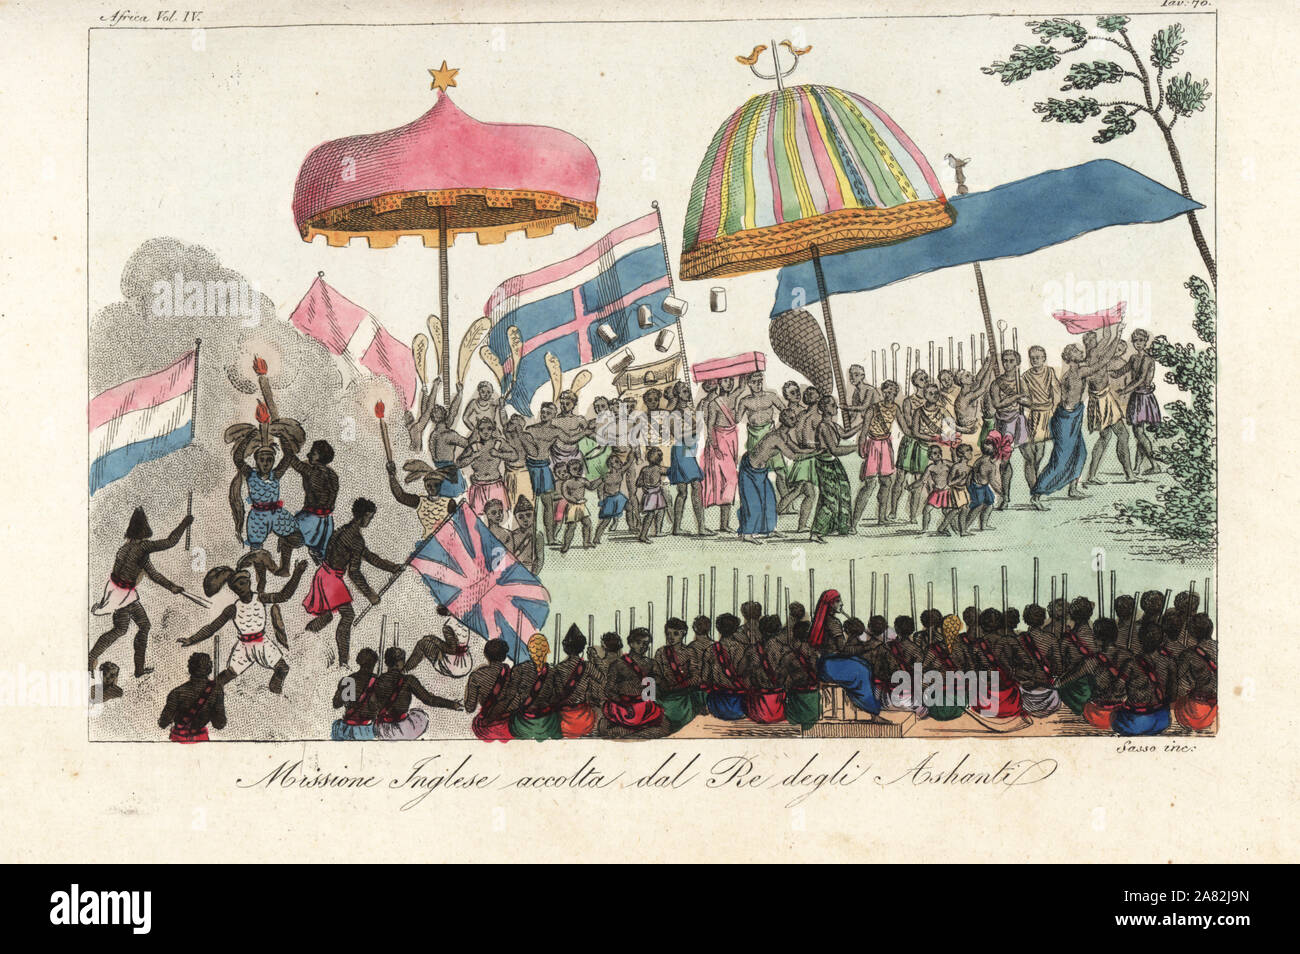 The King of the Ashanti (Ghana) welcomes an English mission led by Thomas Bowdich, 1817. Drummers and dancers with torches perform in front of nobles under parasols and flags. Handcoloured copperplate engraving by Antonio Sasso from Giulio Ferrario's Ancient and Modern Costumes of all the Peoples of the World, Florence, Italy, 1843. Stock Photo